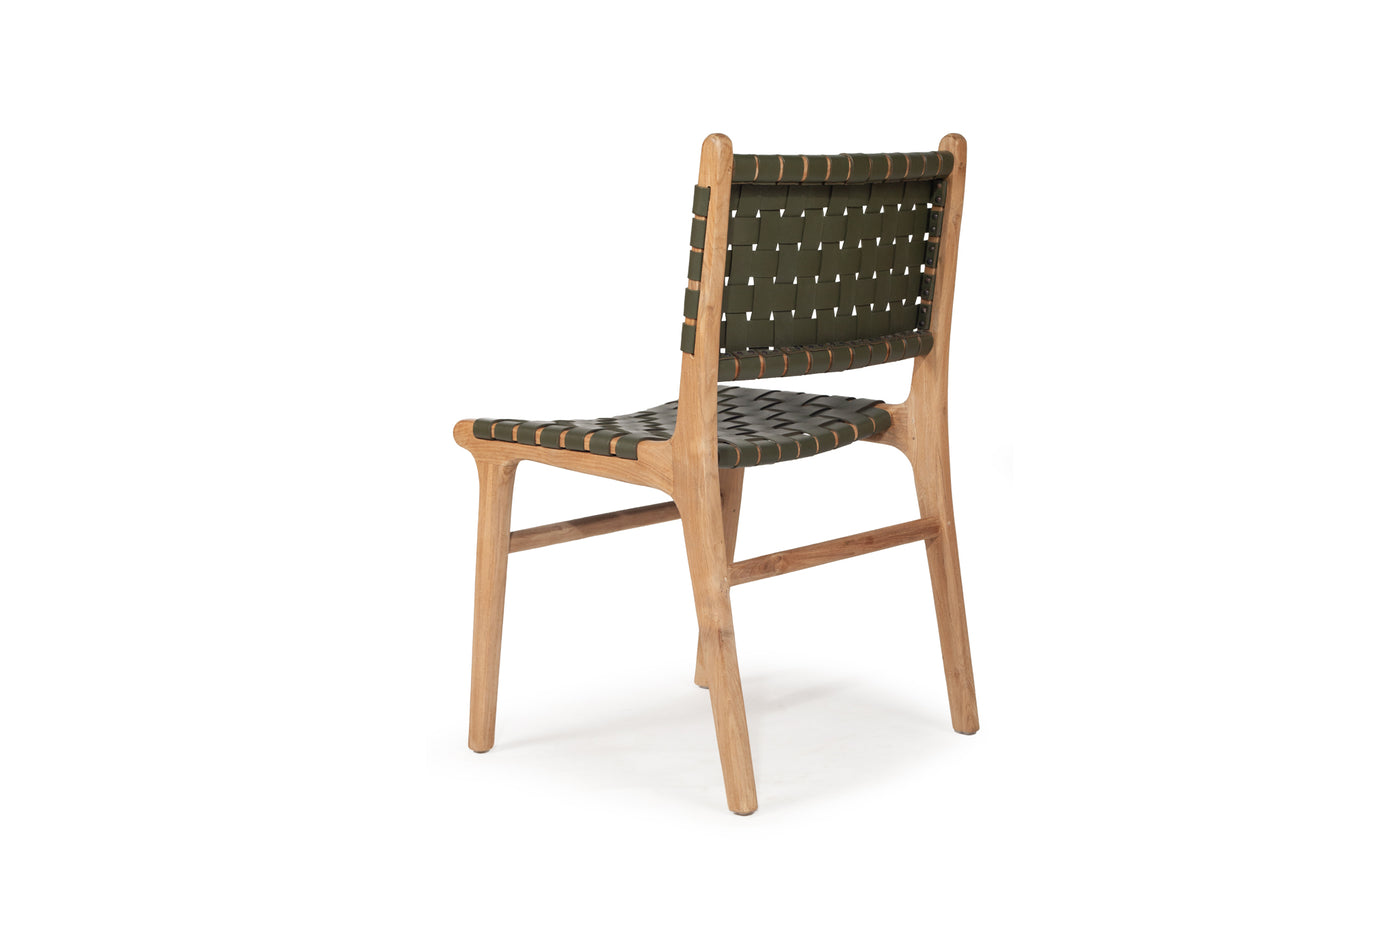 Cashmerie Leather Side Chair - Woven - Olive